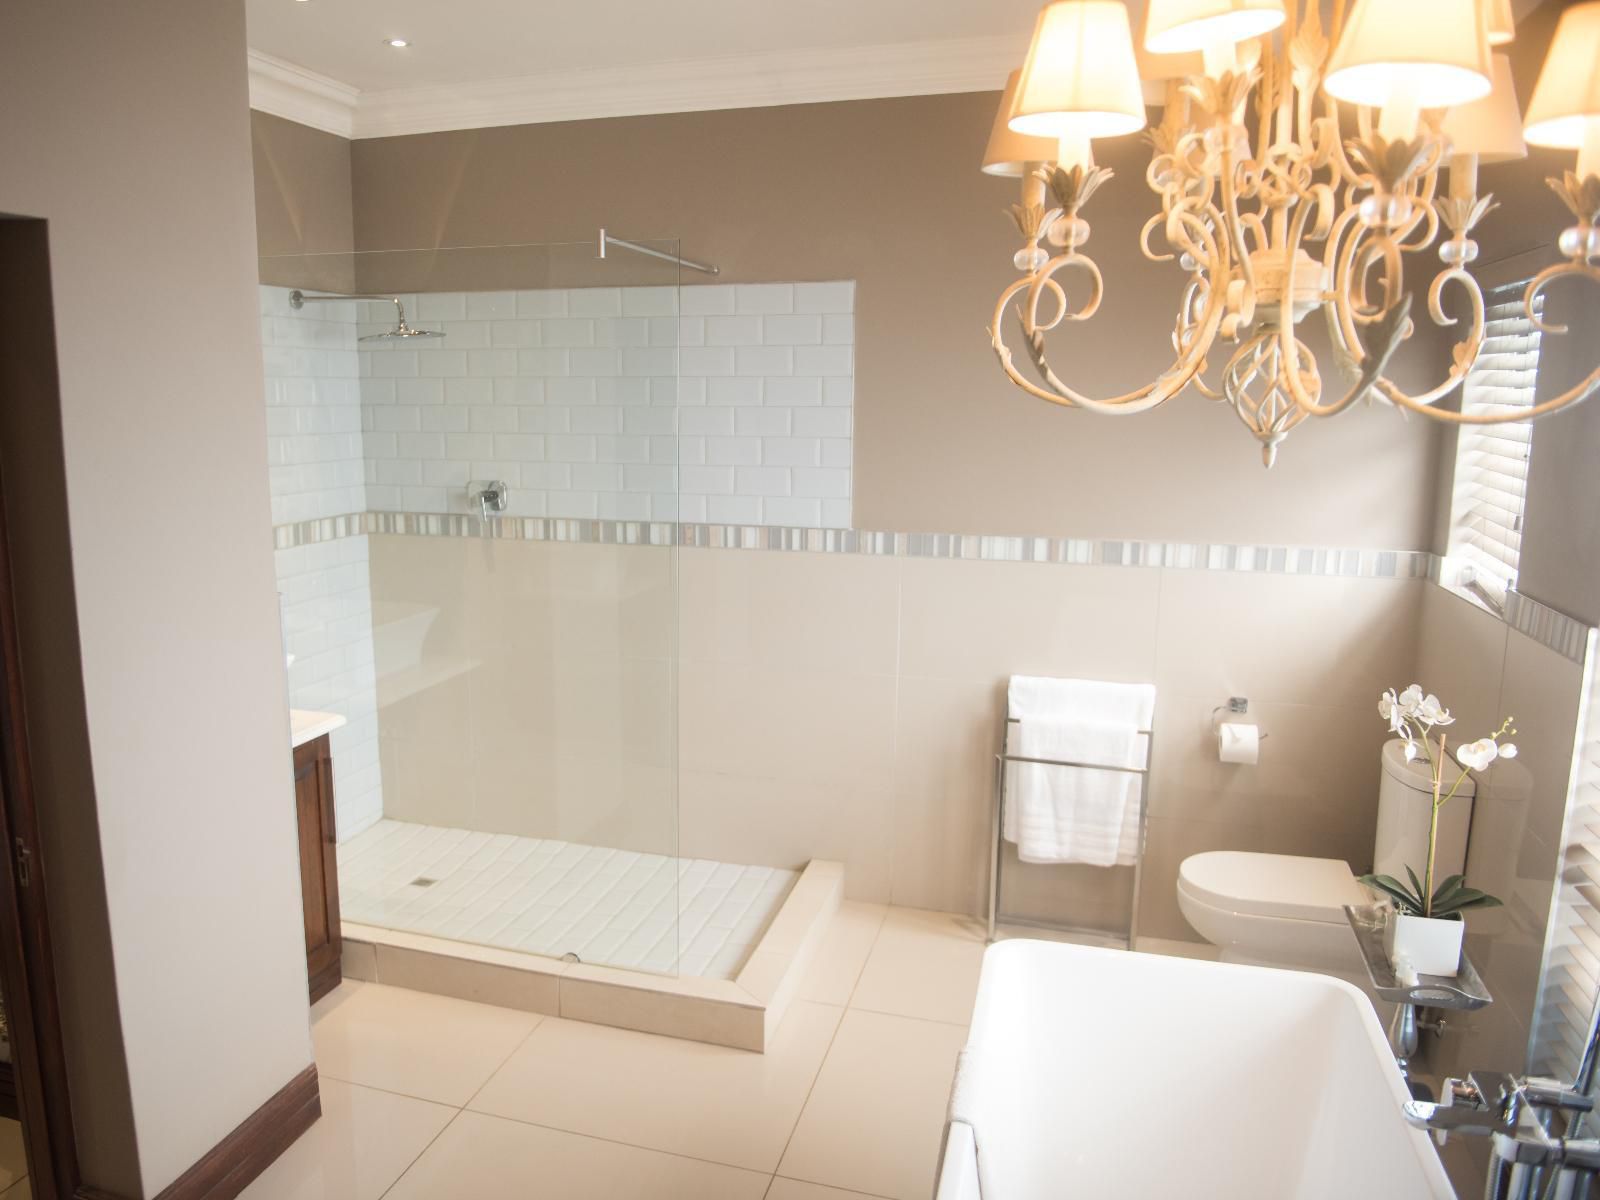 Potch Manor Die Bult Potchefstroom North West Province South Africa Sepia Tones, Bathroom